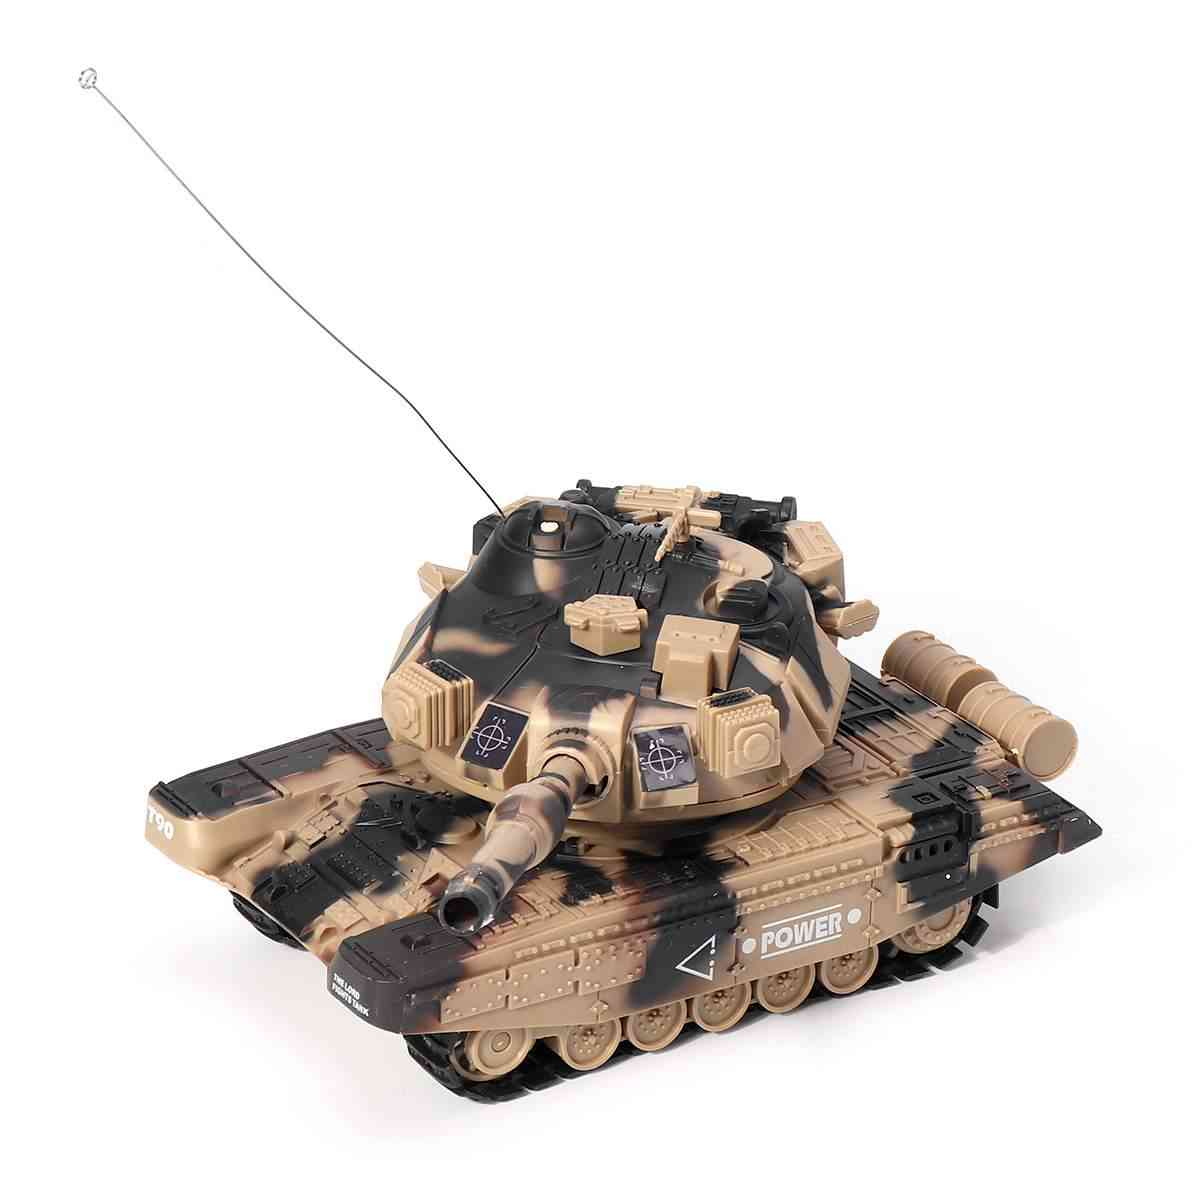 1:32 Military Remote Control War Tank With Shoot Bullets-electronic